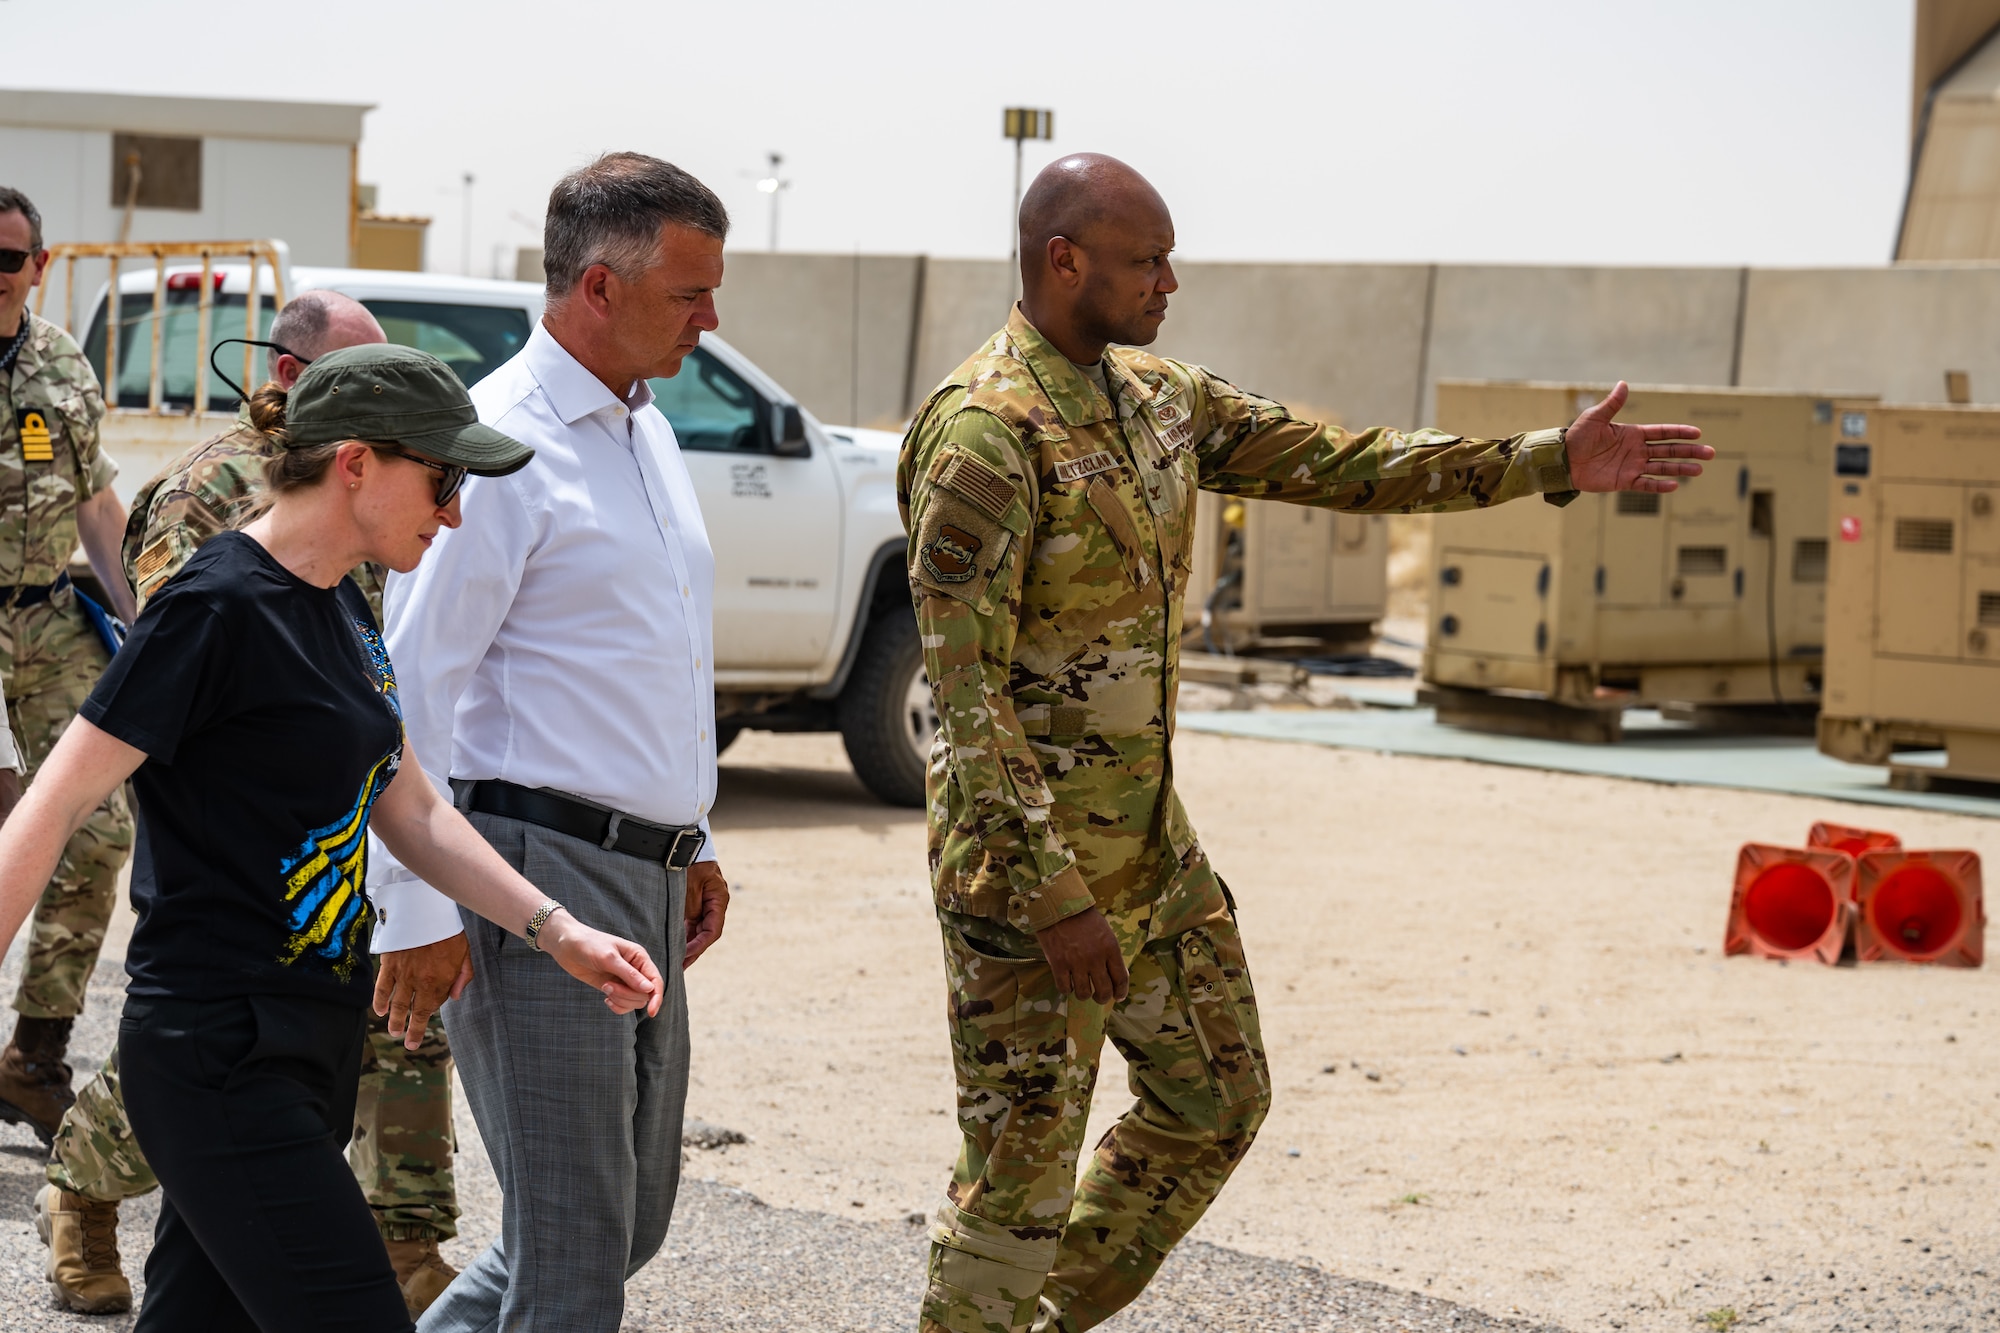 From left, Ambassador Belinda Lewis, British Ambassador to Kuwait, Lord Mark Lancaster, United Kingdom Government’s Defence Export Advocate, and U.S. Air Force Col. Damion Holtzclaw, 386th Air Expeditionary Wing deputy commander, embark on a tour of the installation at Ali Al Salem Air Base, Kuwait, July 4, 2023. A group of U.K. leaders traveled to Kuwait to foster the working relationship between the U.K. and their Kuwaiti partners, and the visit also provided the opportunity for the U.S. to further the connection with our coalition partners on a strategic level. (U.S. Air Force photo by Staff Sgt. Kevin Long)